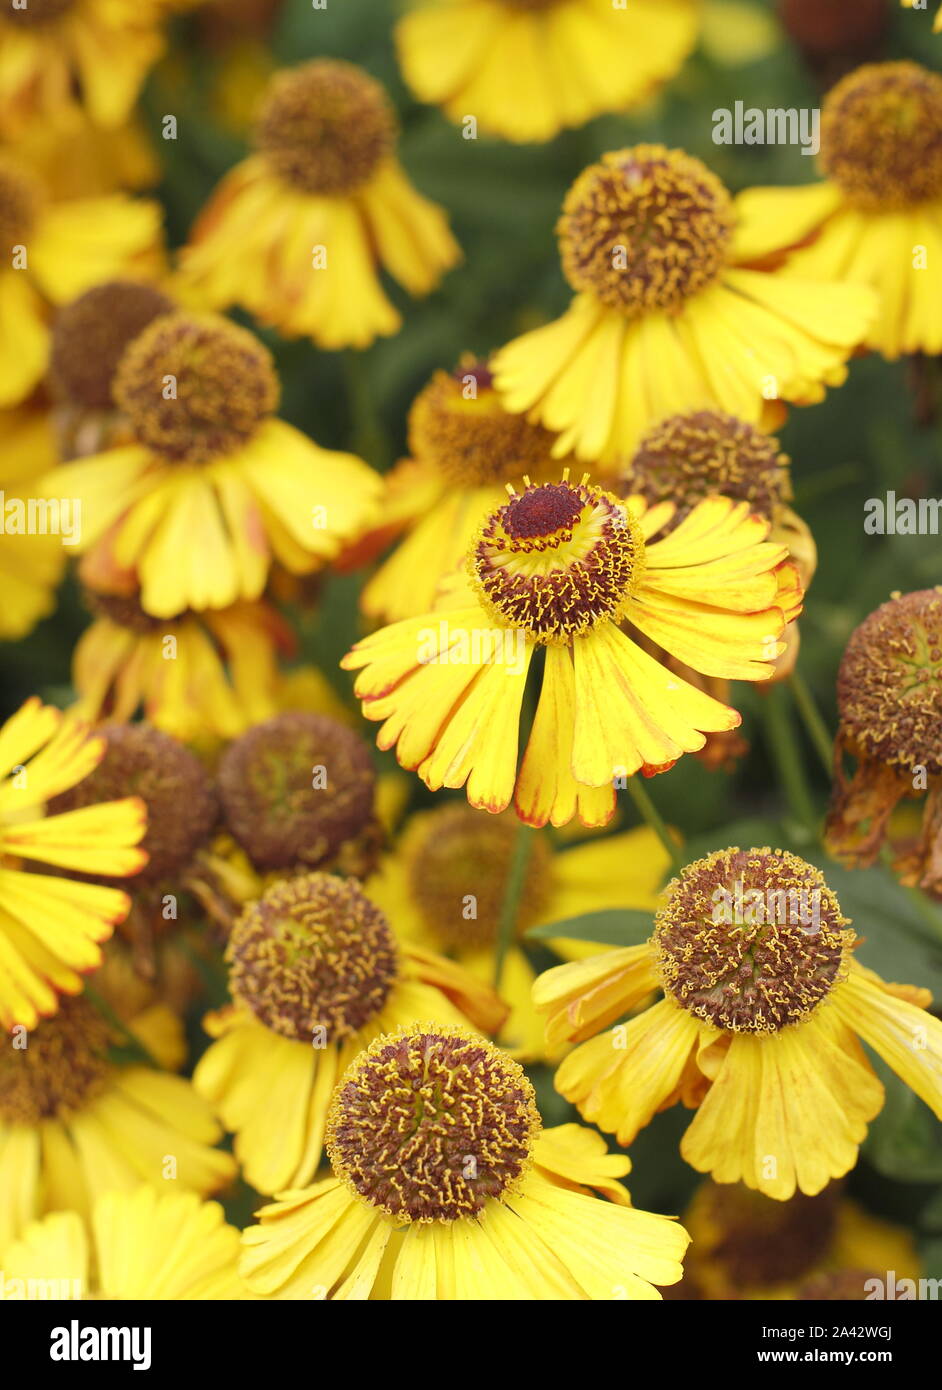 Helenium 'Goldrausch' sneezeweed displaying characteristic bright yellow blossoms in a late summer garden. UK Stock Photo